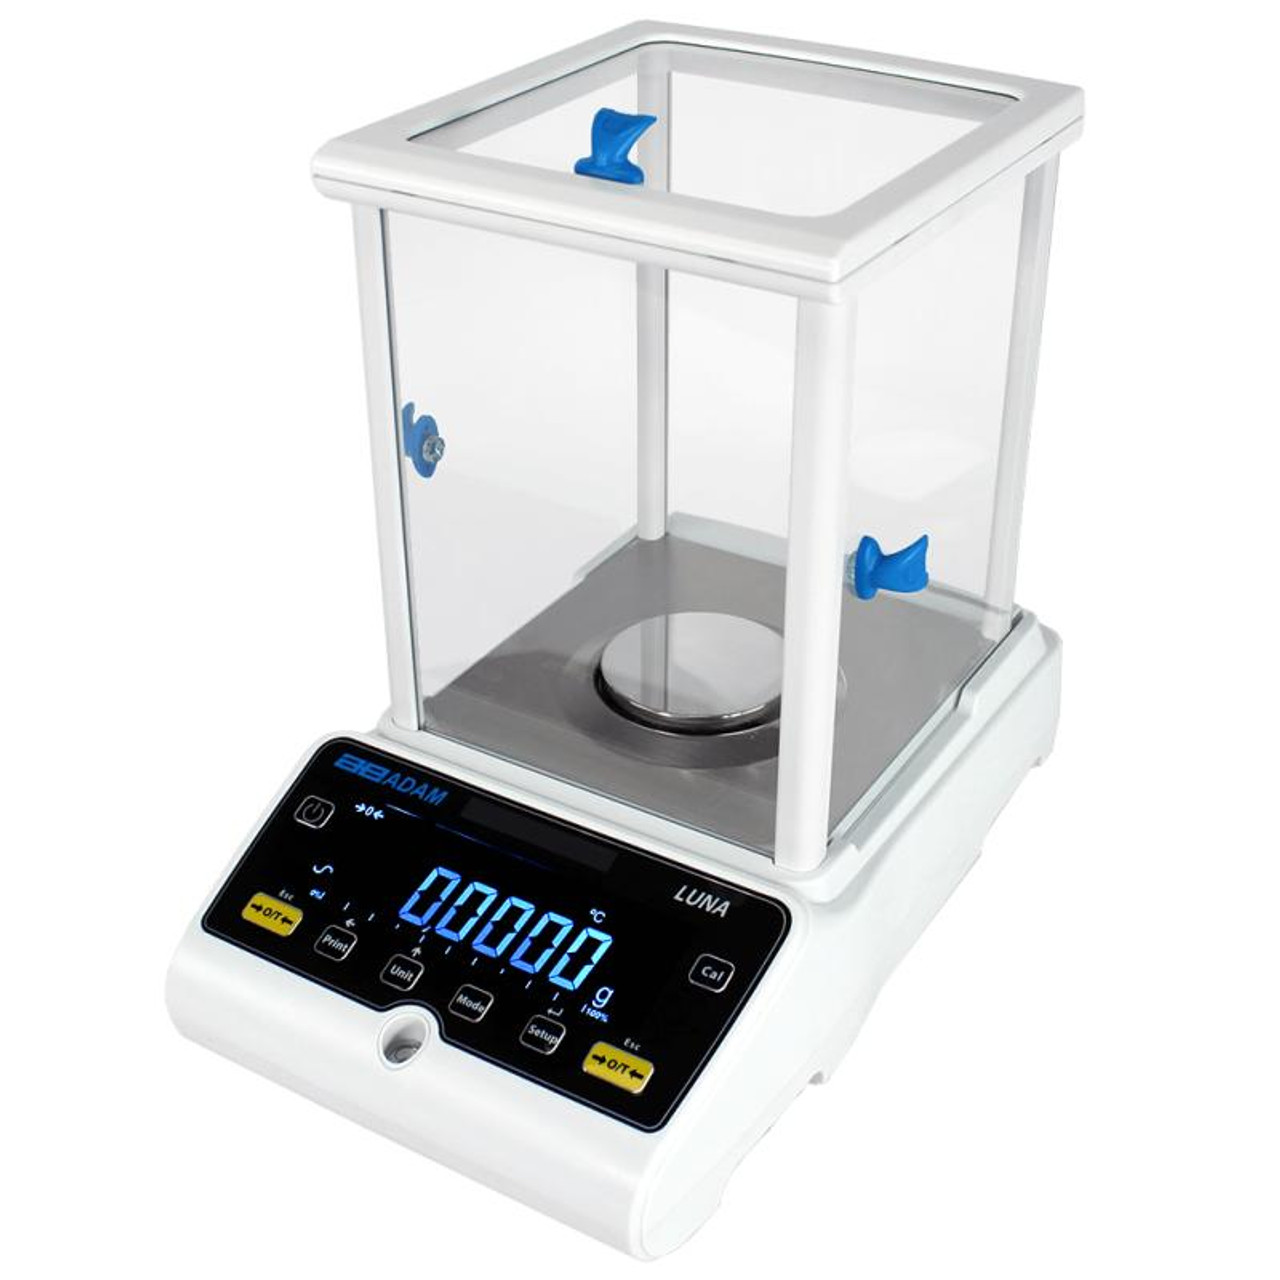 Laboratory & Industrial Weighing Scale Manufacturer - Adam Equipment USA